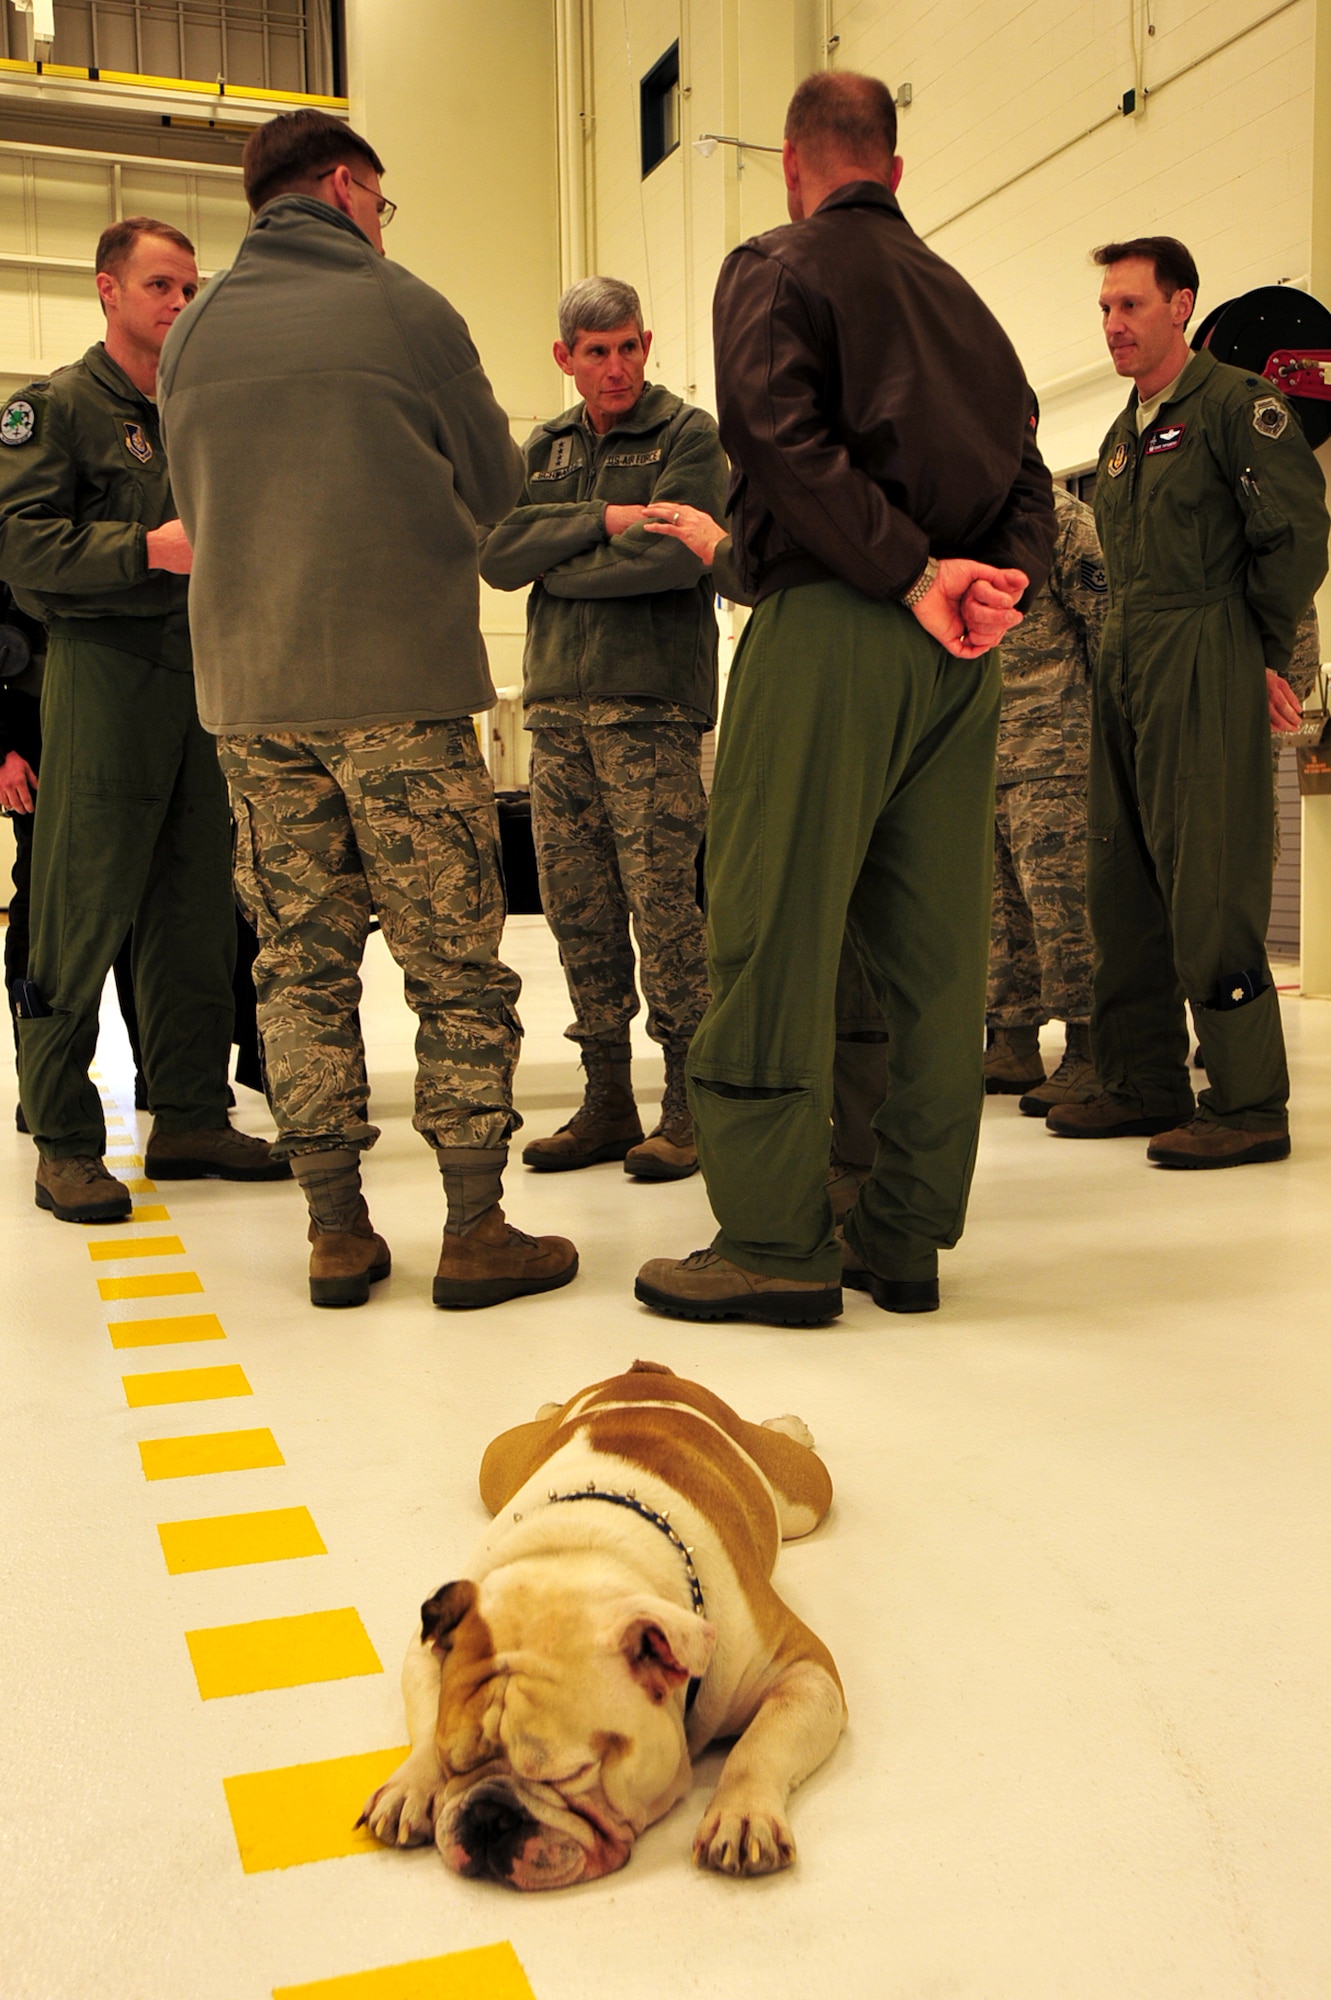 Fado, 525th Fighter Squadron "deputy commander," rests while Air Force Chief of Staff Gen. Norton Schwartz talks to senior leadership during his visit at Joint Base Elmendorf-Richardson, Alaska, Feb. 16, 2012.  Fado has been the squadron mascot since 2007 when 525 FS was activated. (U.S. Air Force photo/Staff Sgt. Sheila deVera)